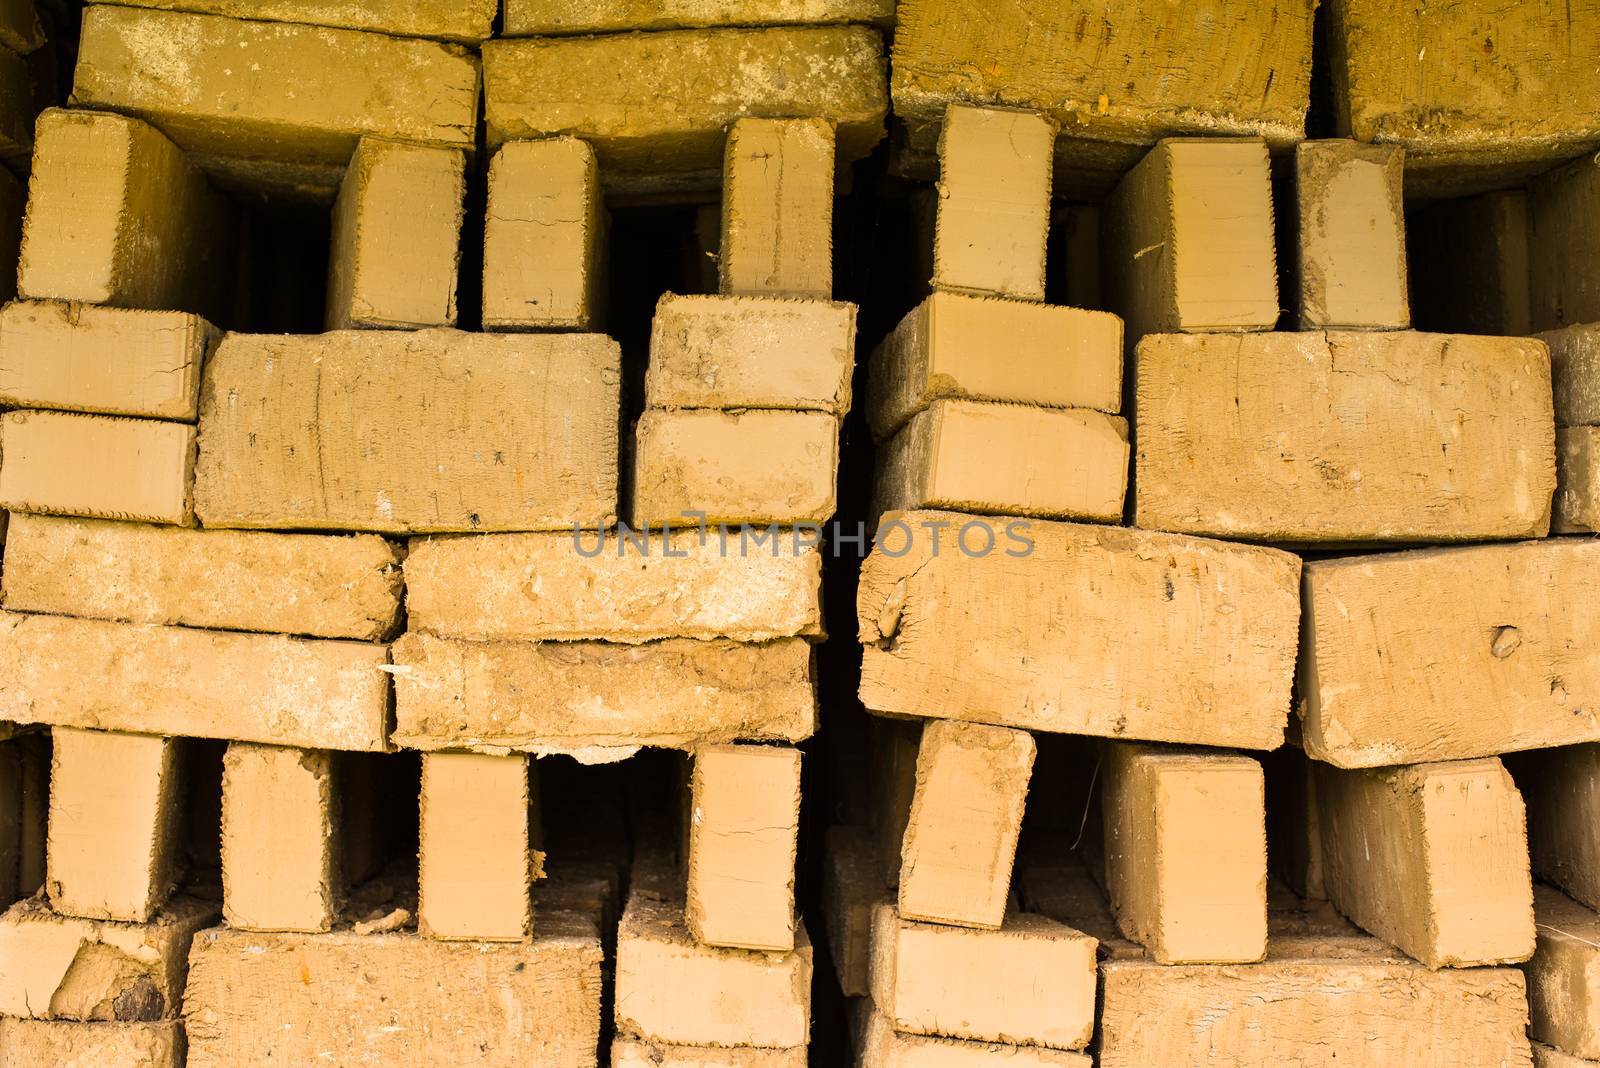 Stack of raw bricks drying in the open air.